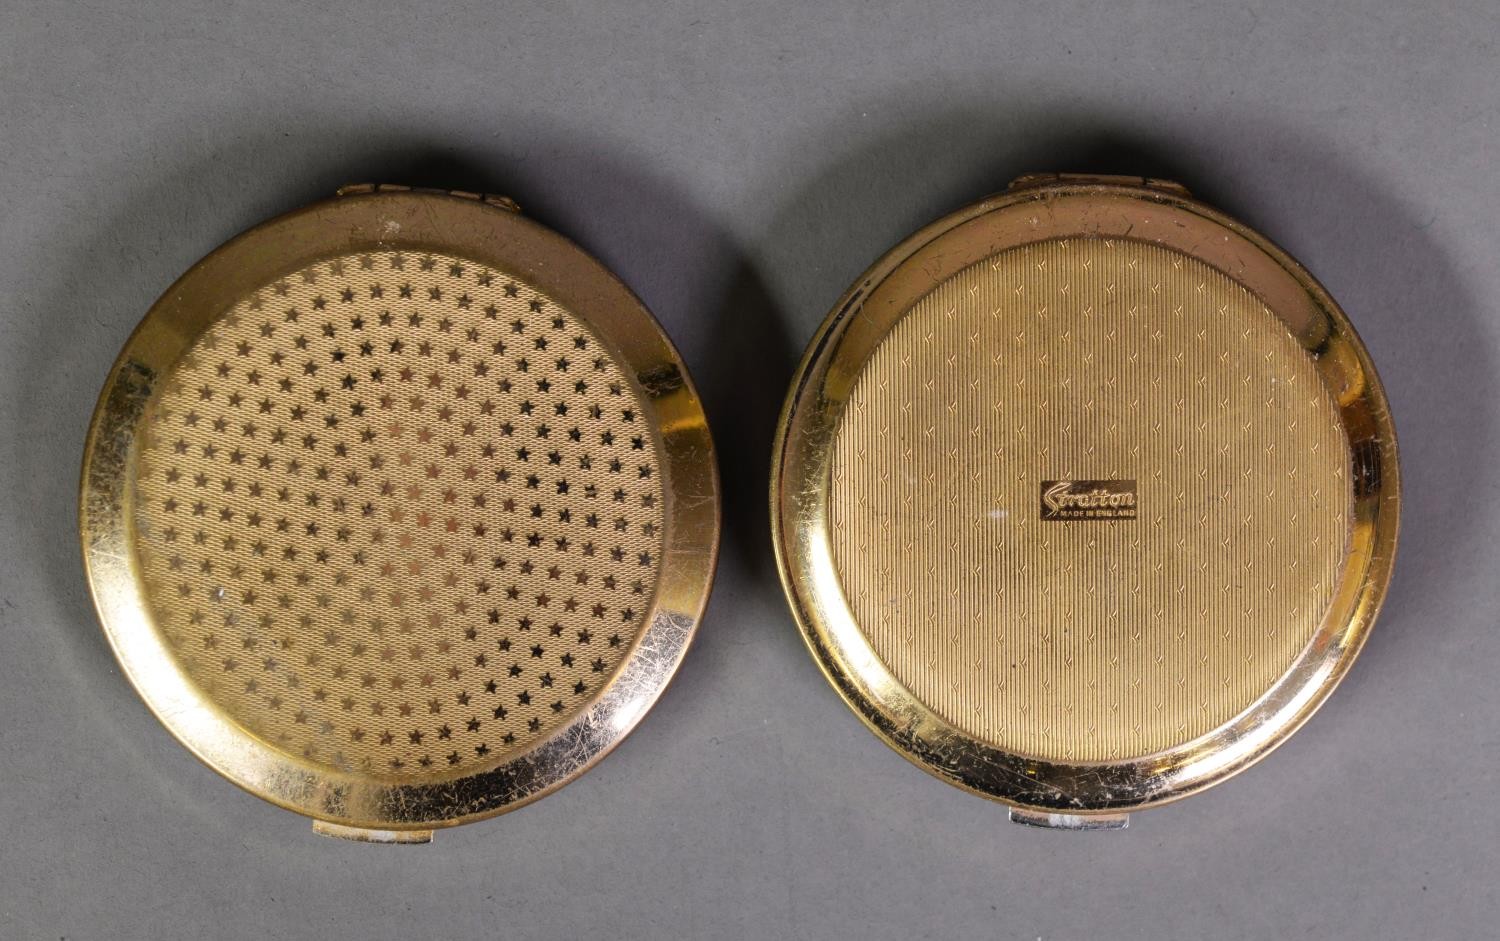 TWO STRATTON CIRCULAR POWDER COMPACTS, one with mother of pearl tiled top, the other with - Image 2 of 2